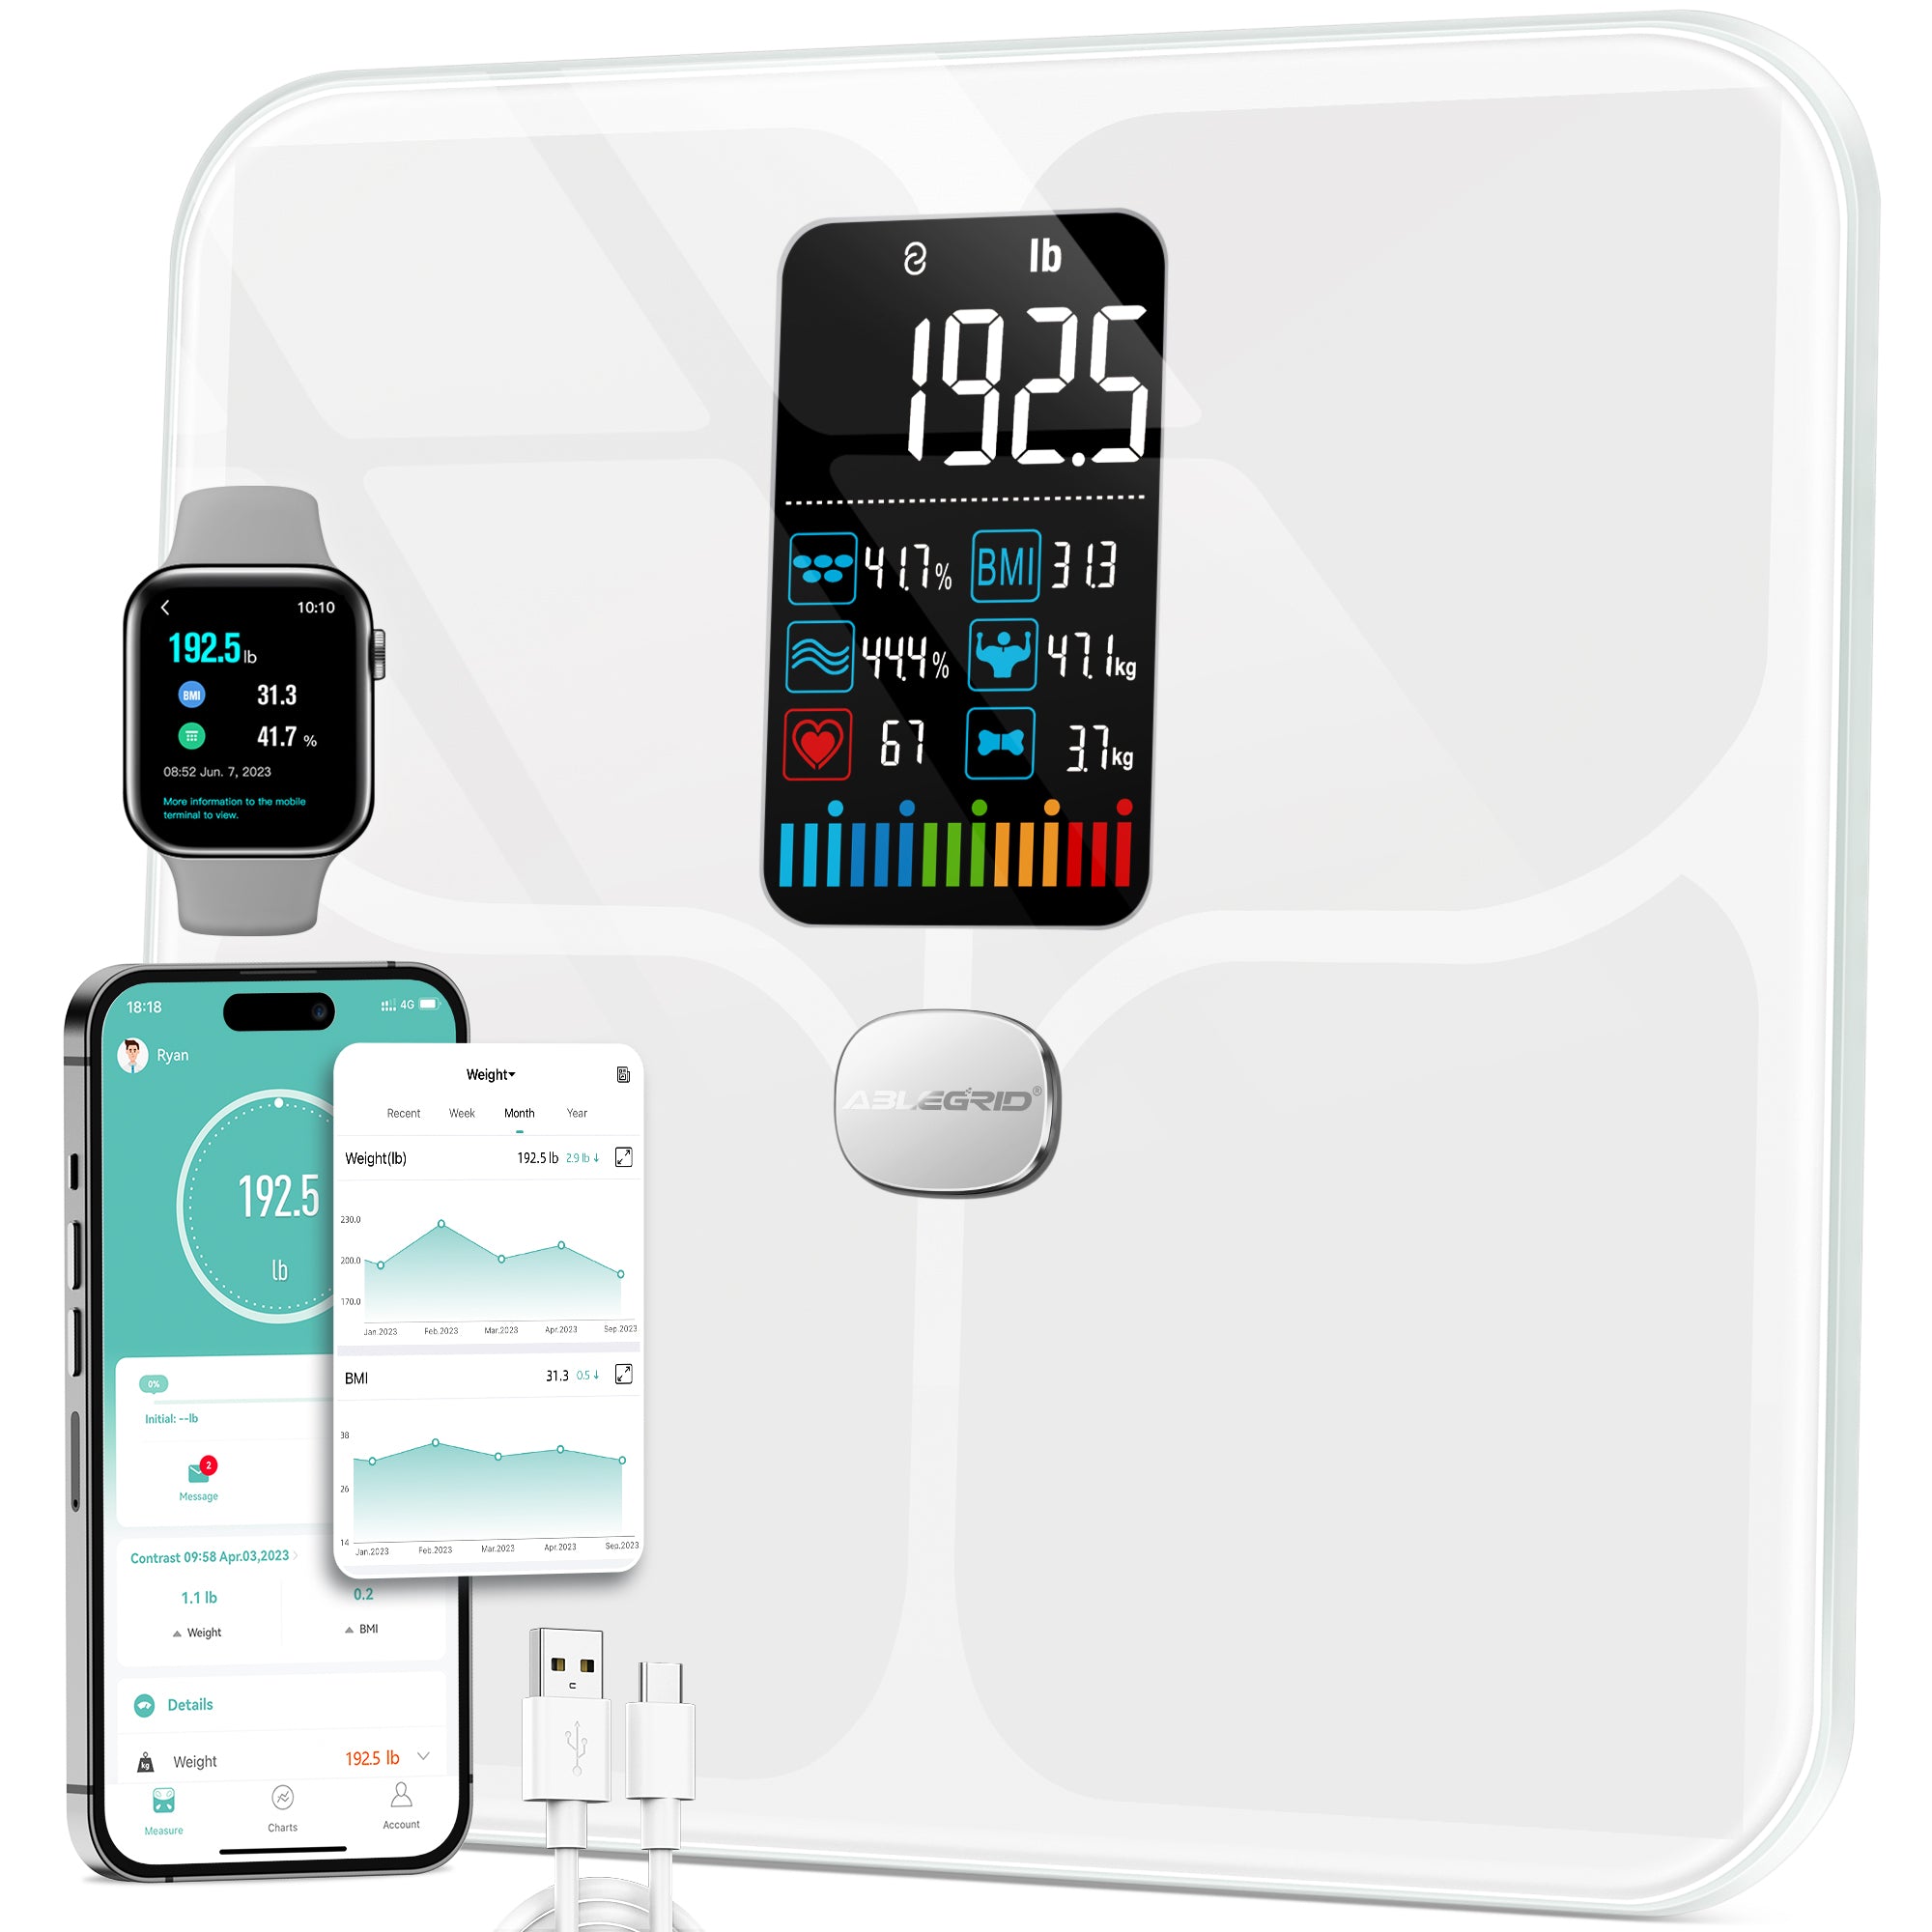 ABLEGRID Body Fat Scale, Smart Digital Bathroom Scale for Body Weight and Fat, Large LCD Display, Rechargeable Weight Scale with 16 Body Composition Metrics BMI, Heart Rate, Baby Mode, 400lb, White